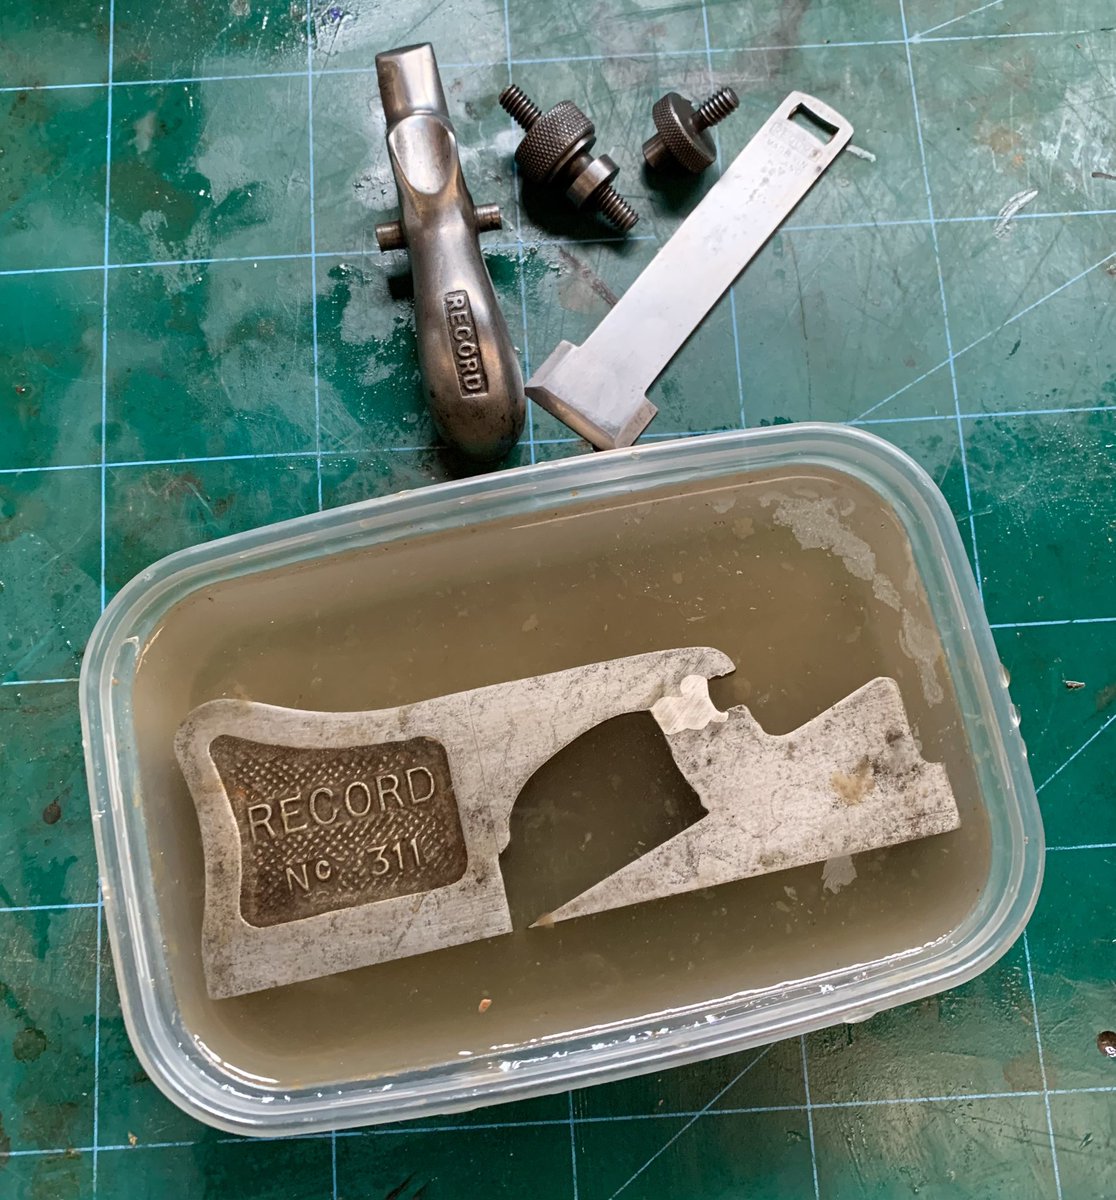 Yeh that’s cleaning nicely. Another classic will make it into the Workshop Cabinet of Fame 😉🤣 #oldtools #workshop #restoration #vintagetools